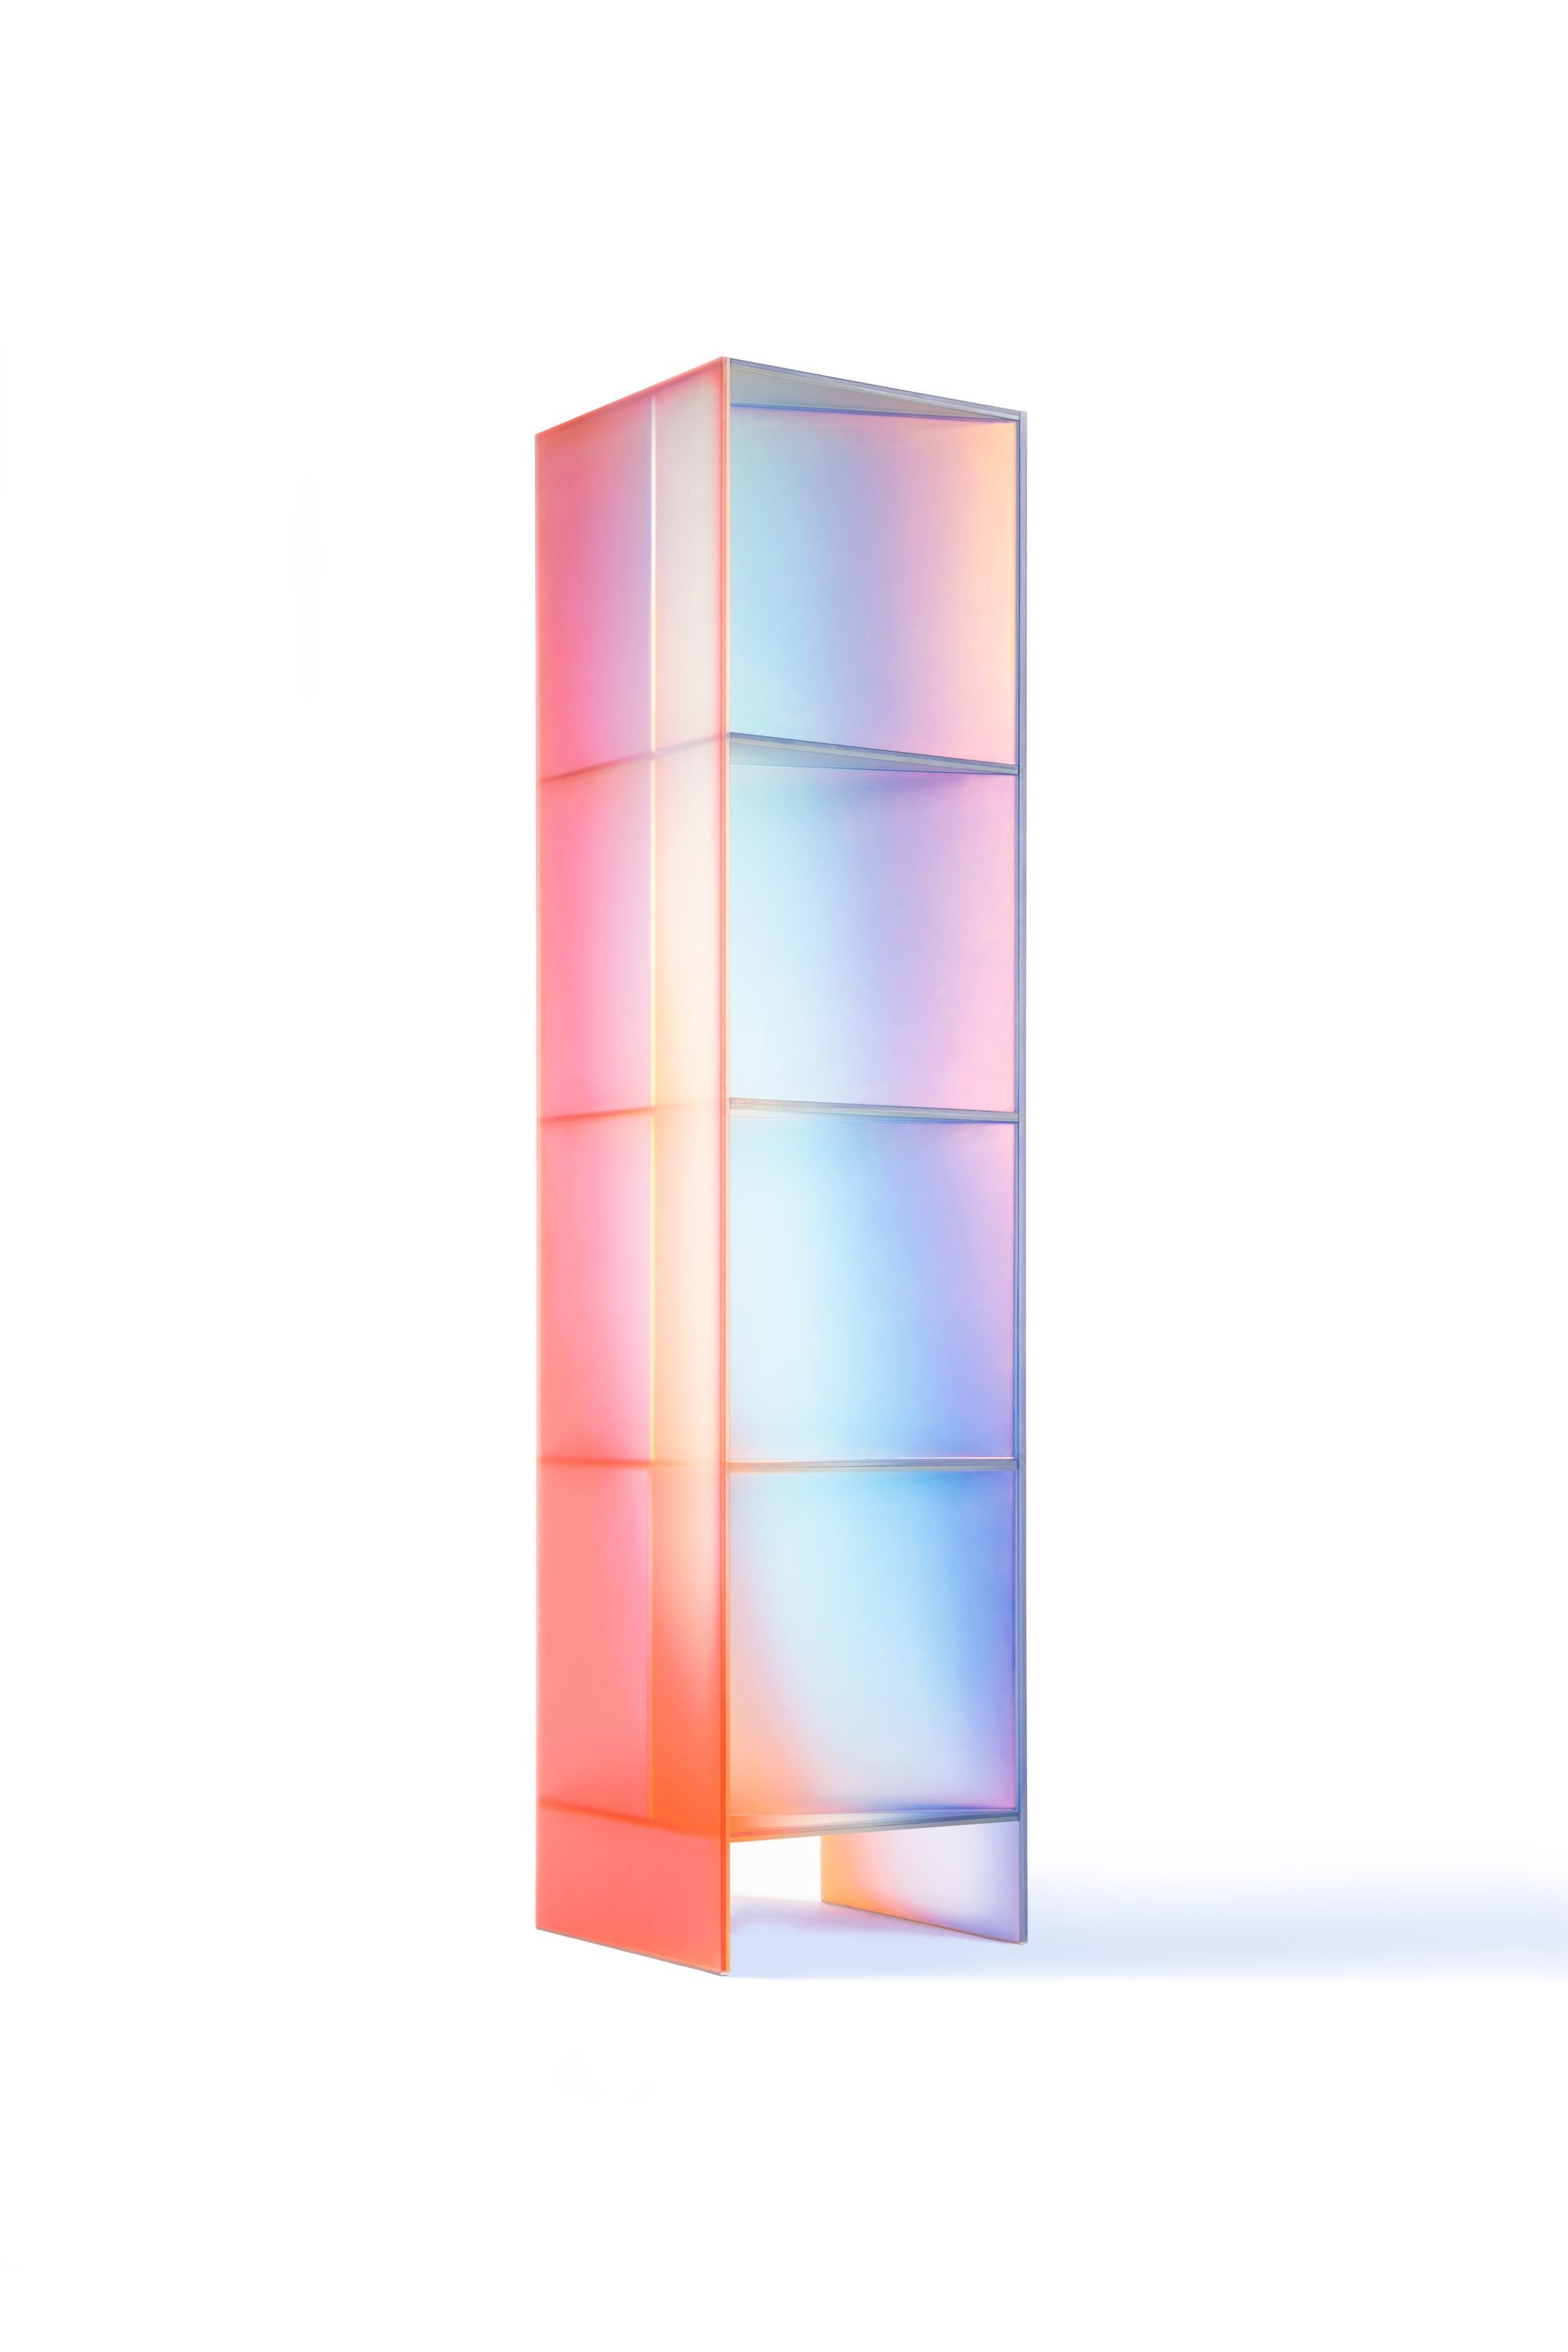 Chinese Gradient Color Glass Display Unit by Studio Buzao